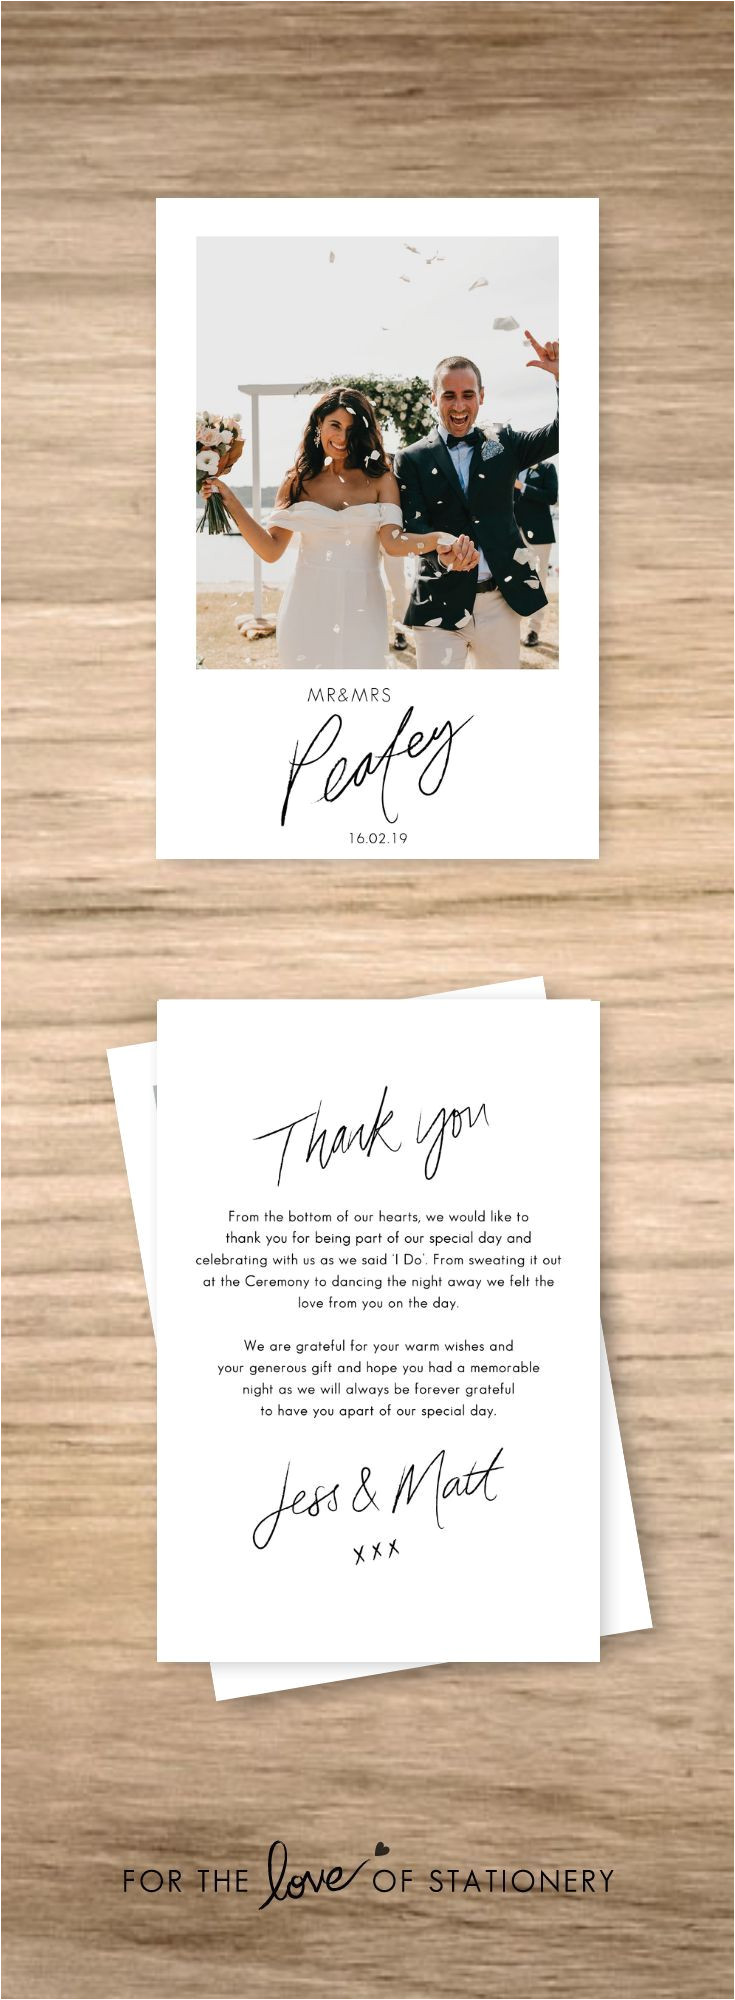 Wording for Thank You Card Wedding Personalised Wedding Thank You Cards with Photos with